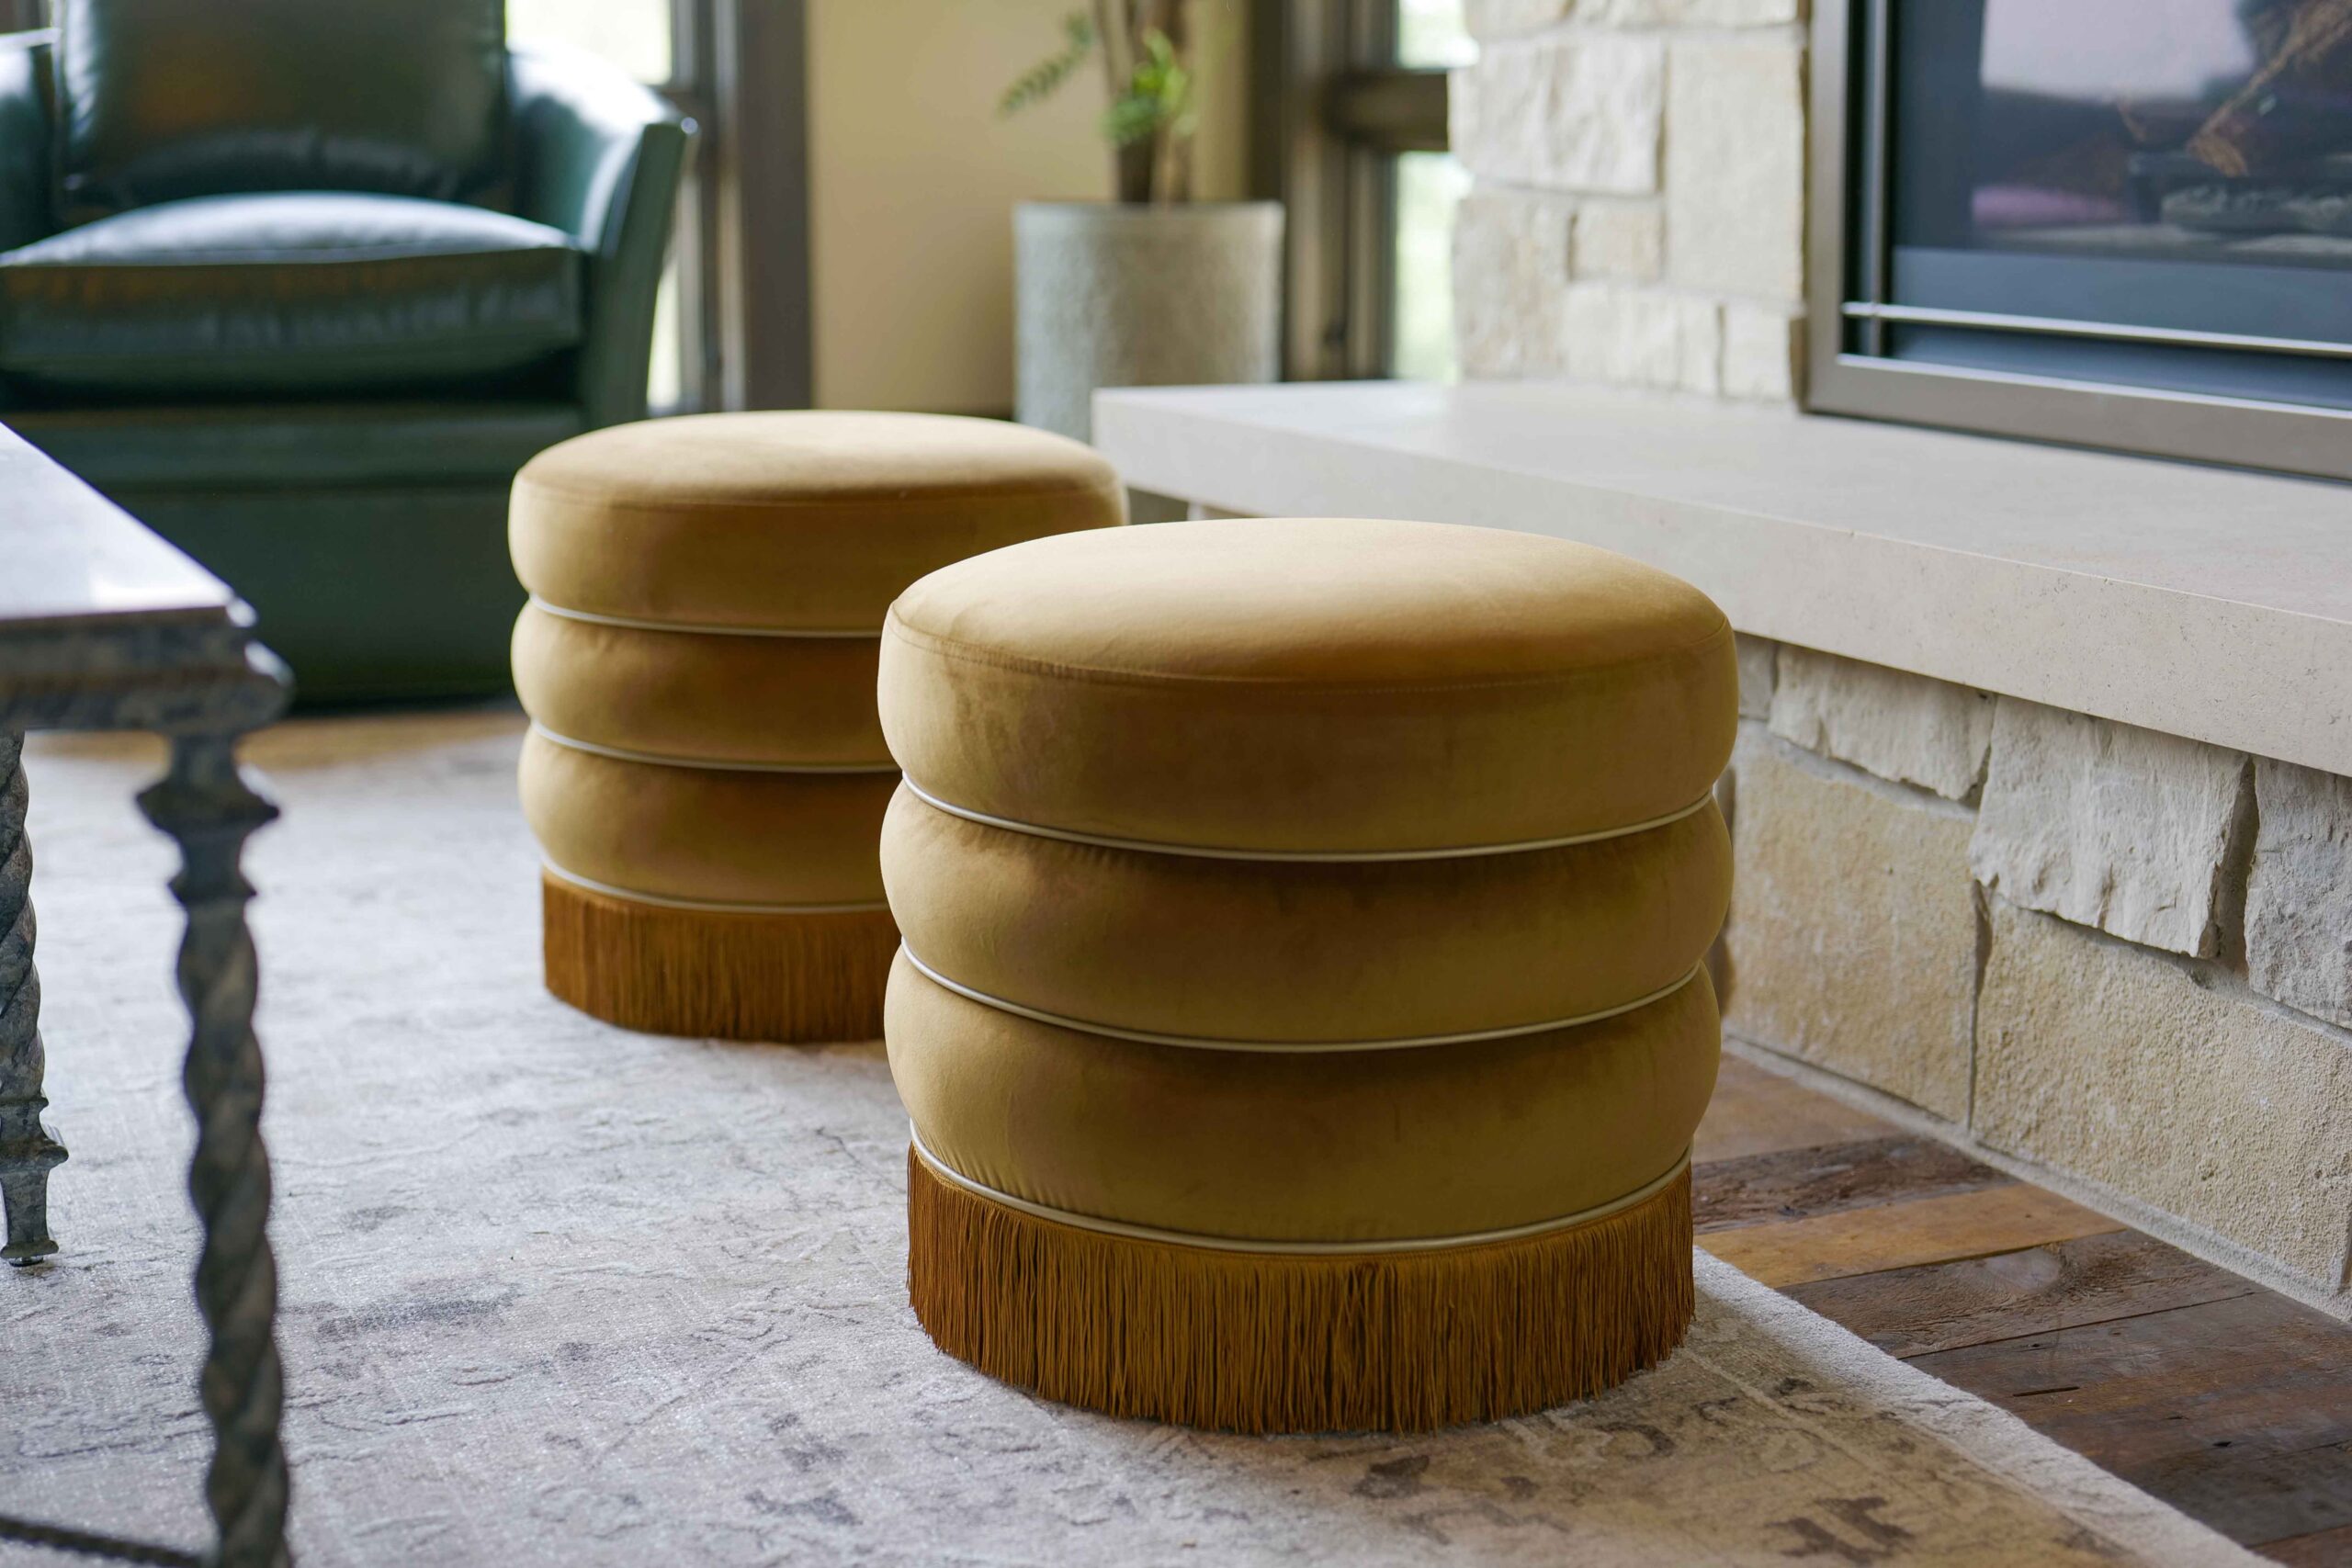 In a Modern Tuscan Mediterranean home, two stools are arranged in front of a fireplace in the cozy living room.